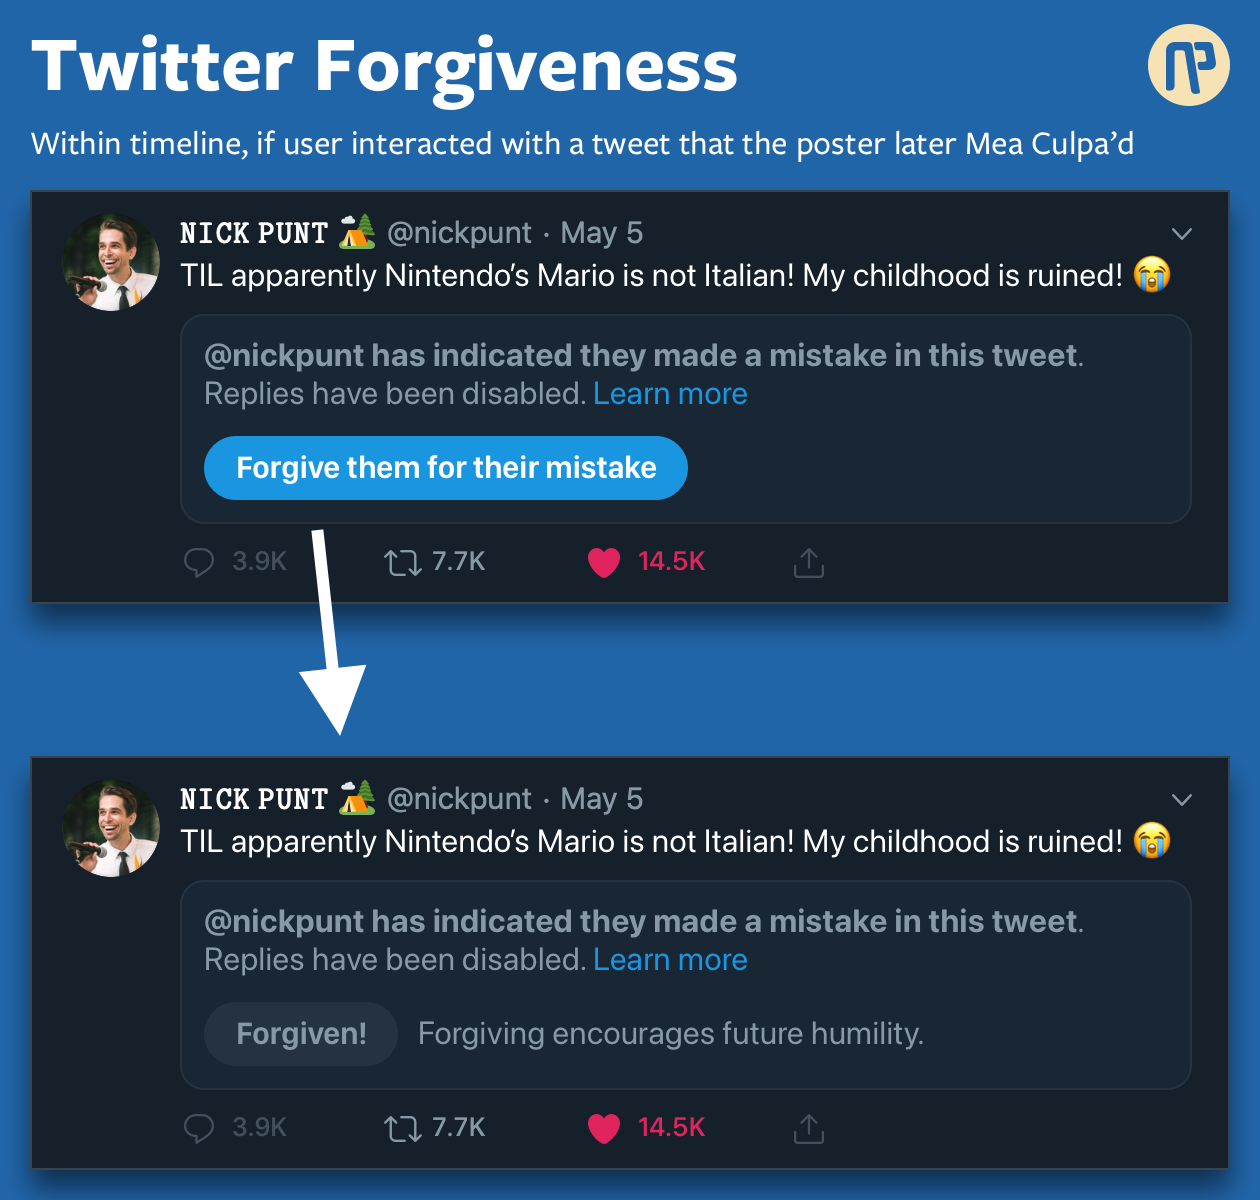 This image shows a means for users that interacted with the mistaken tweet to offer forgiveness by pressing a button. It is captioned "Twitter Forgiveness. Within timeline, if user interacted with a tweet htat the poster later Mea Culpa'd". It then shows two images of the same tweet, the first is the tweet with an info box indicating the mistake, except that box now contains a button that says 'Forgive them for their mistake'. An arrow points to the second image showing what happens when the button is pressed, changing the 'Forgive' button into the caption "Forgiven! Forgiving encourages future humility."